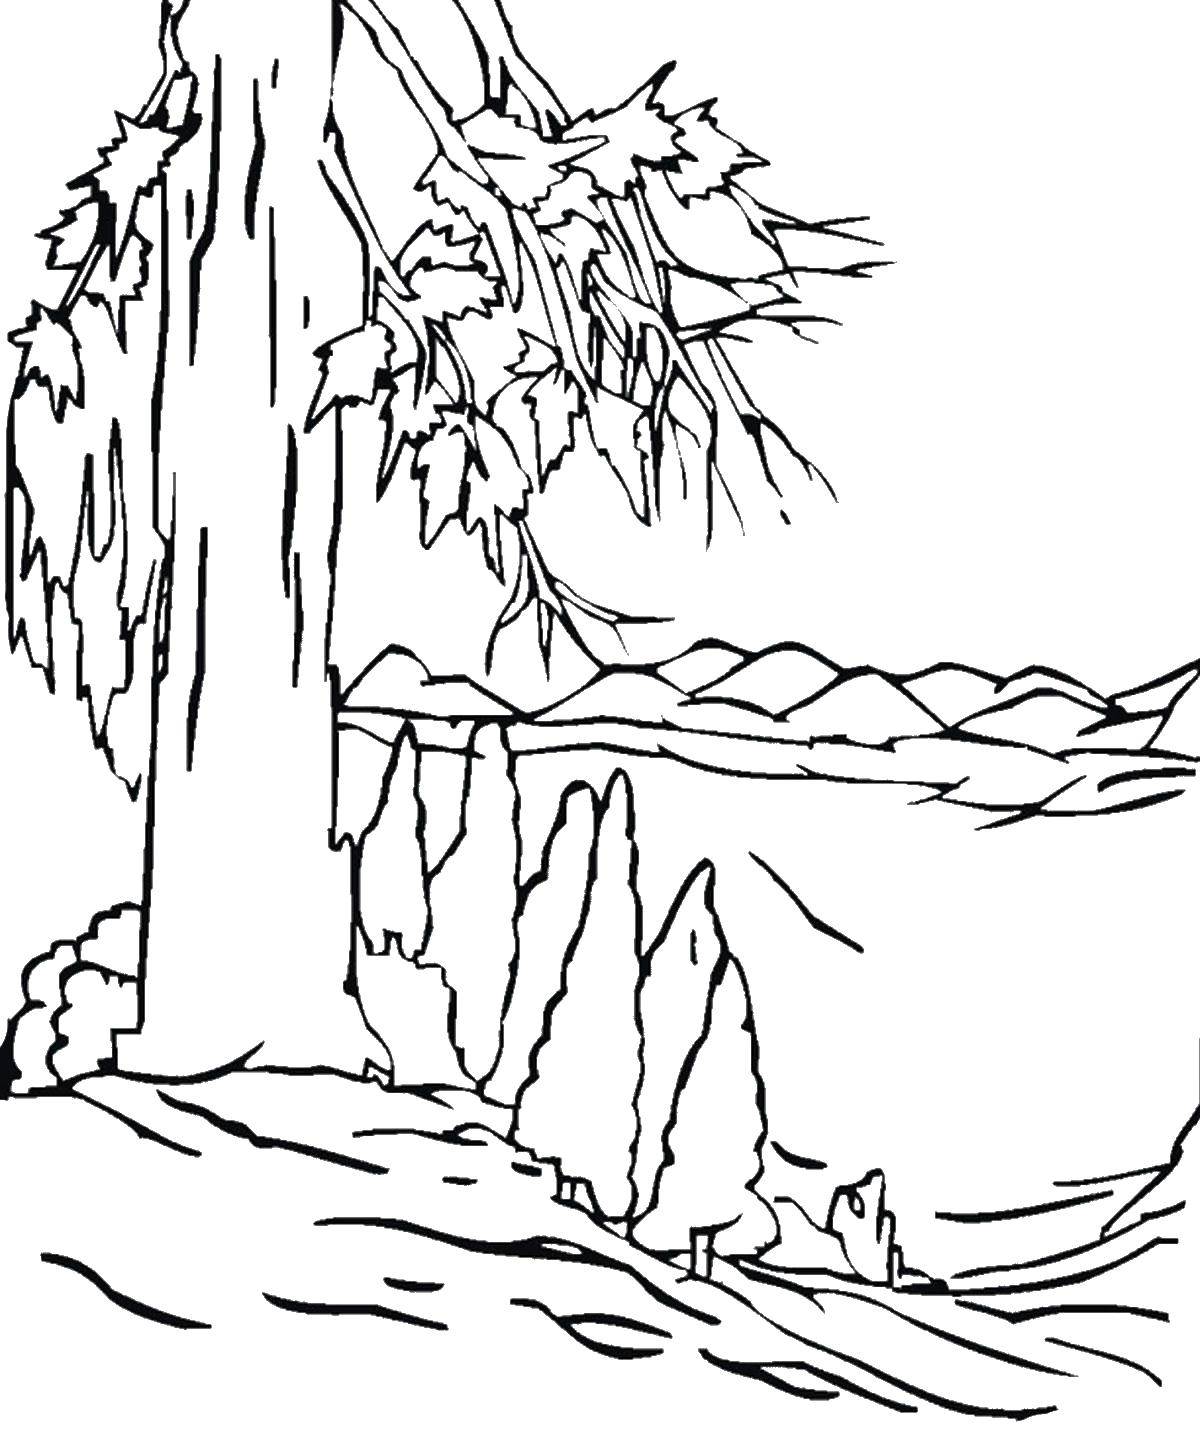 Coloring Forest landscape. Category Nature. Tags:  Nature, forest, mountains.